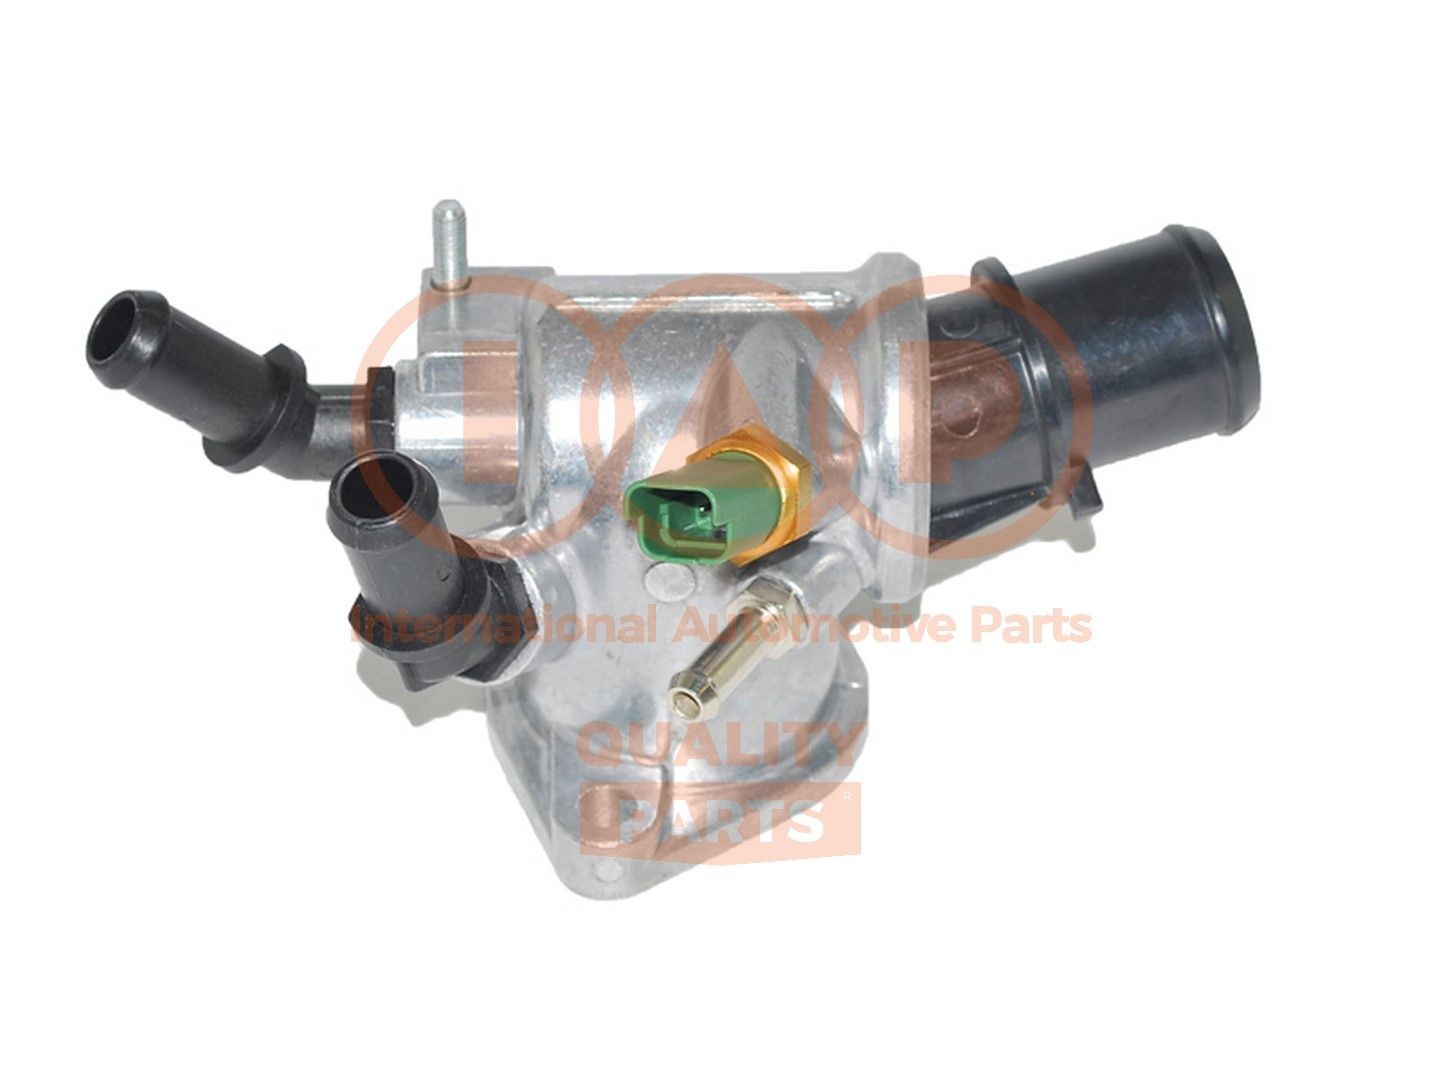 IAP QUALITY PARTS 155-16101 Engine thermostat 13 38 039